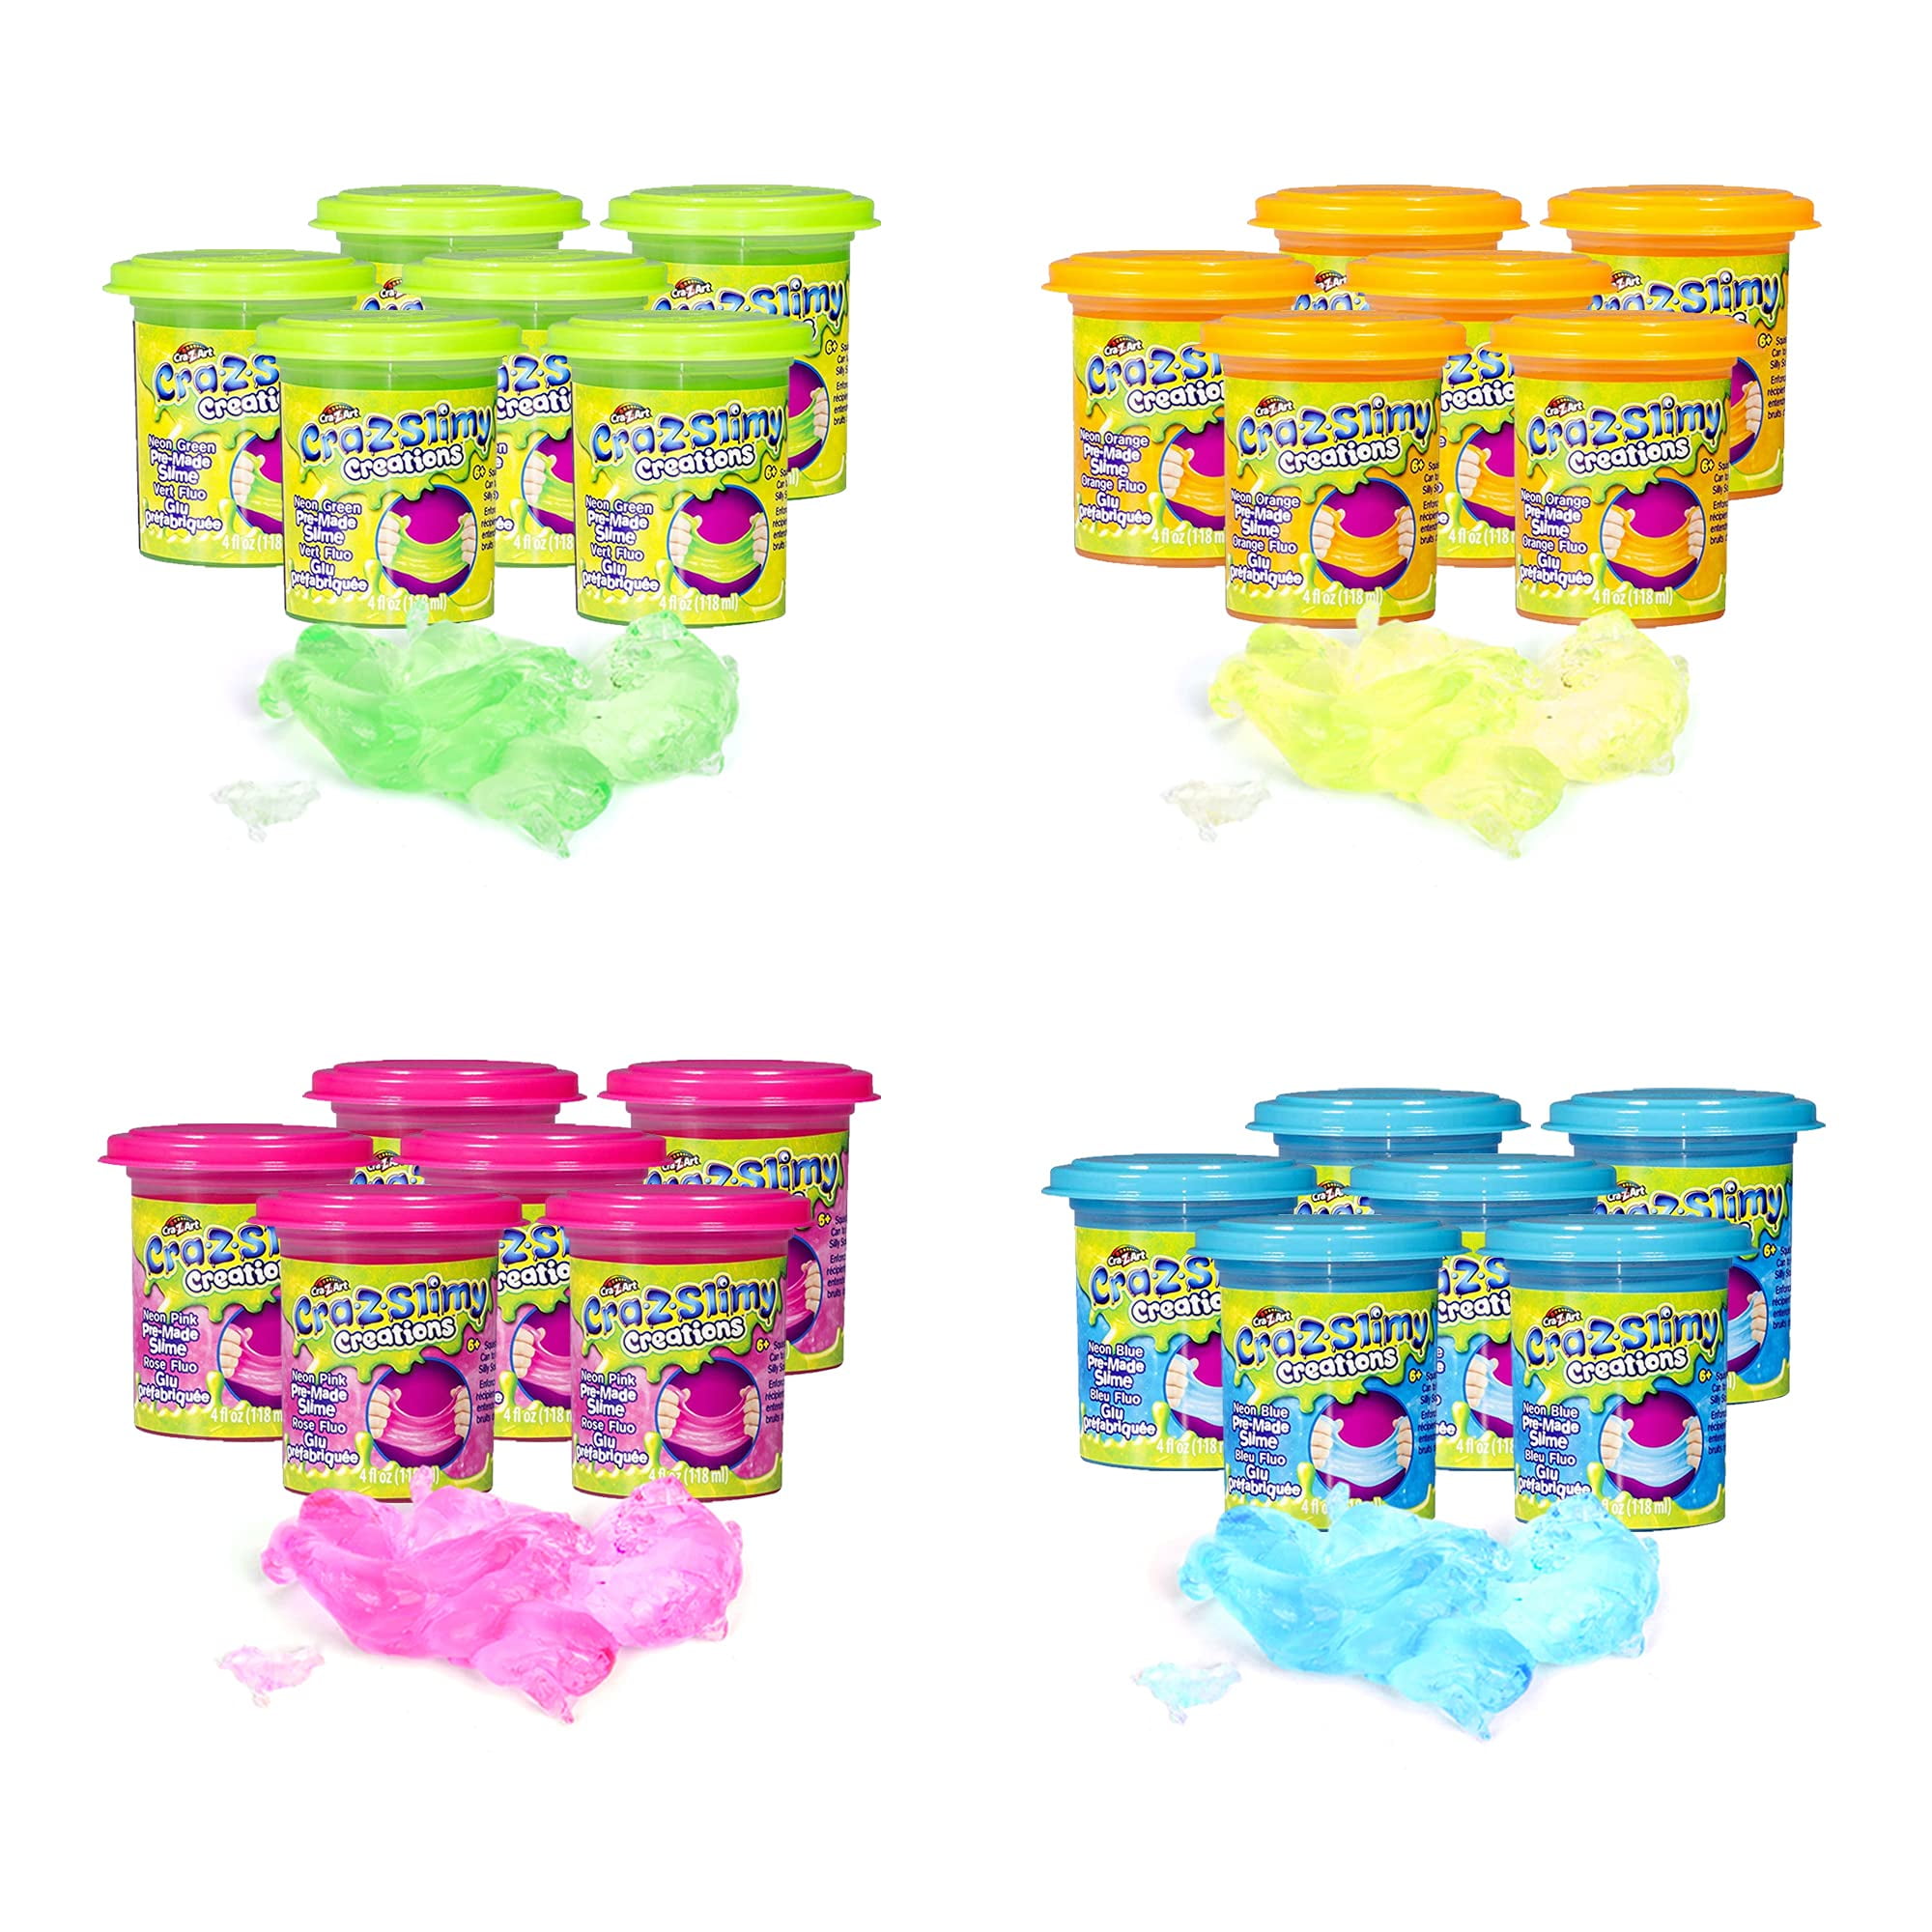 Travelwant Rainbow Putty Slime Kit Neon Glitter Colors Unicorn Colors  Glitter Putty Crystal Clear Slime Fidget Toy Squishy & Stretchy